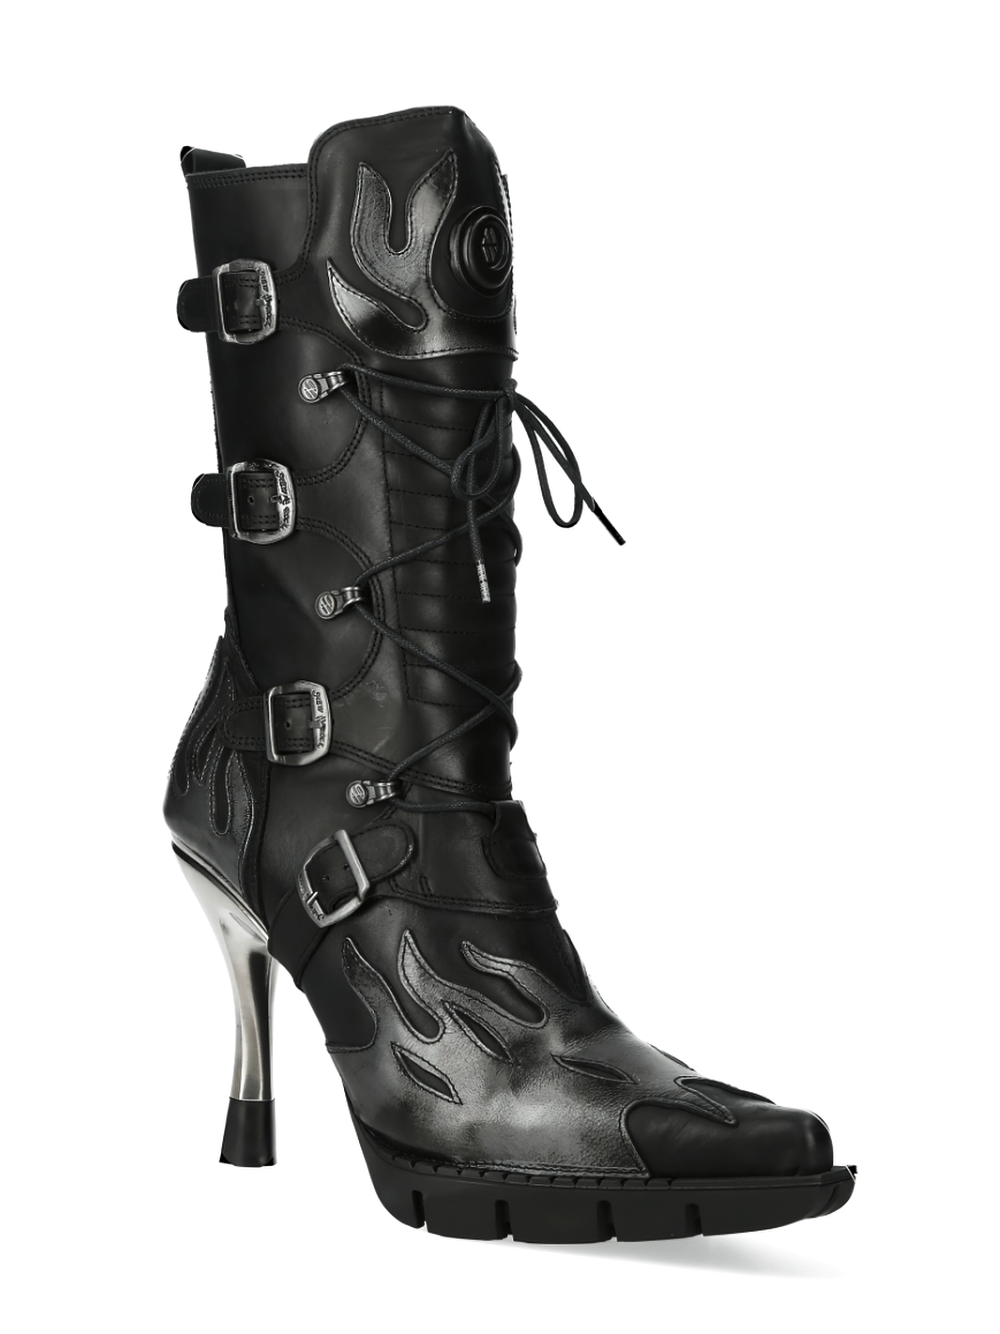 NEW ROCK Flame Accented Heeled Boots with Metallic Touch